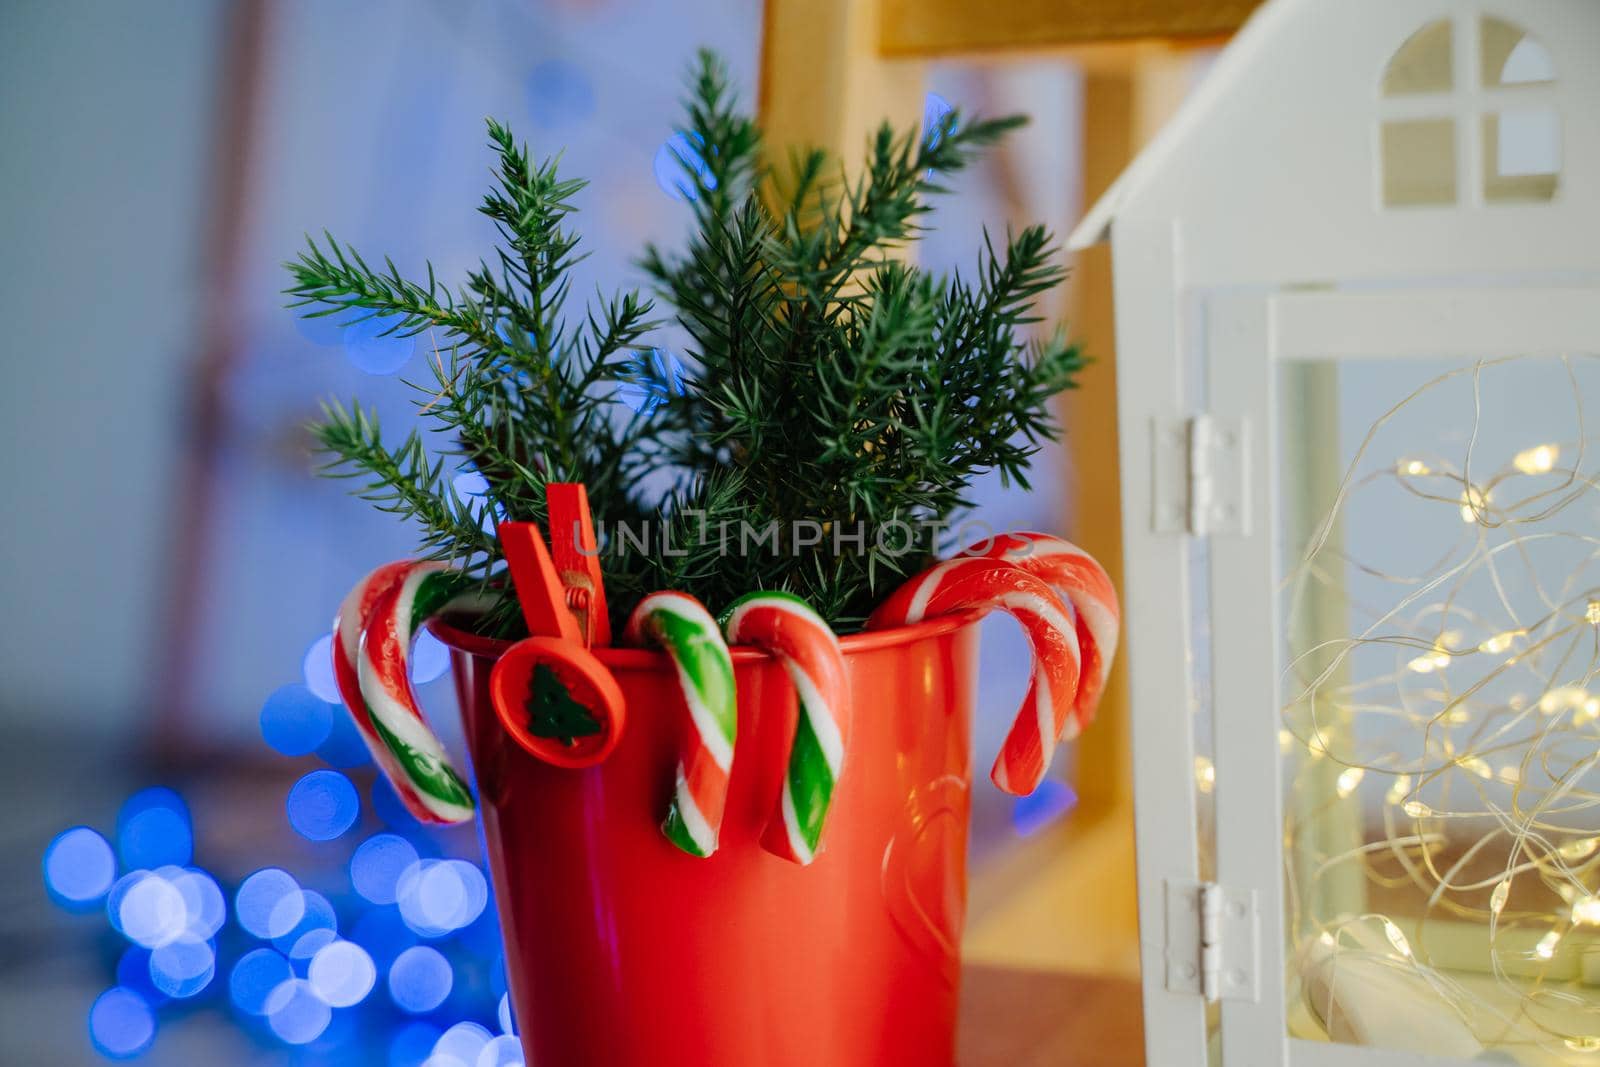 Red pot with Christmas ledins and juniper twigs. Red clothespin with Christmas tree. White little house garland with warm light. Blue bokeh in the background.